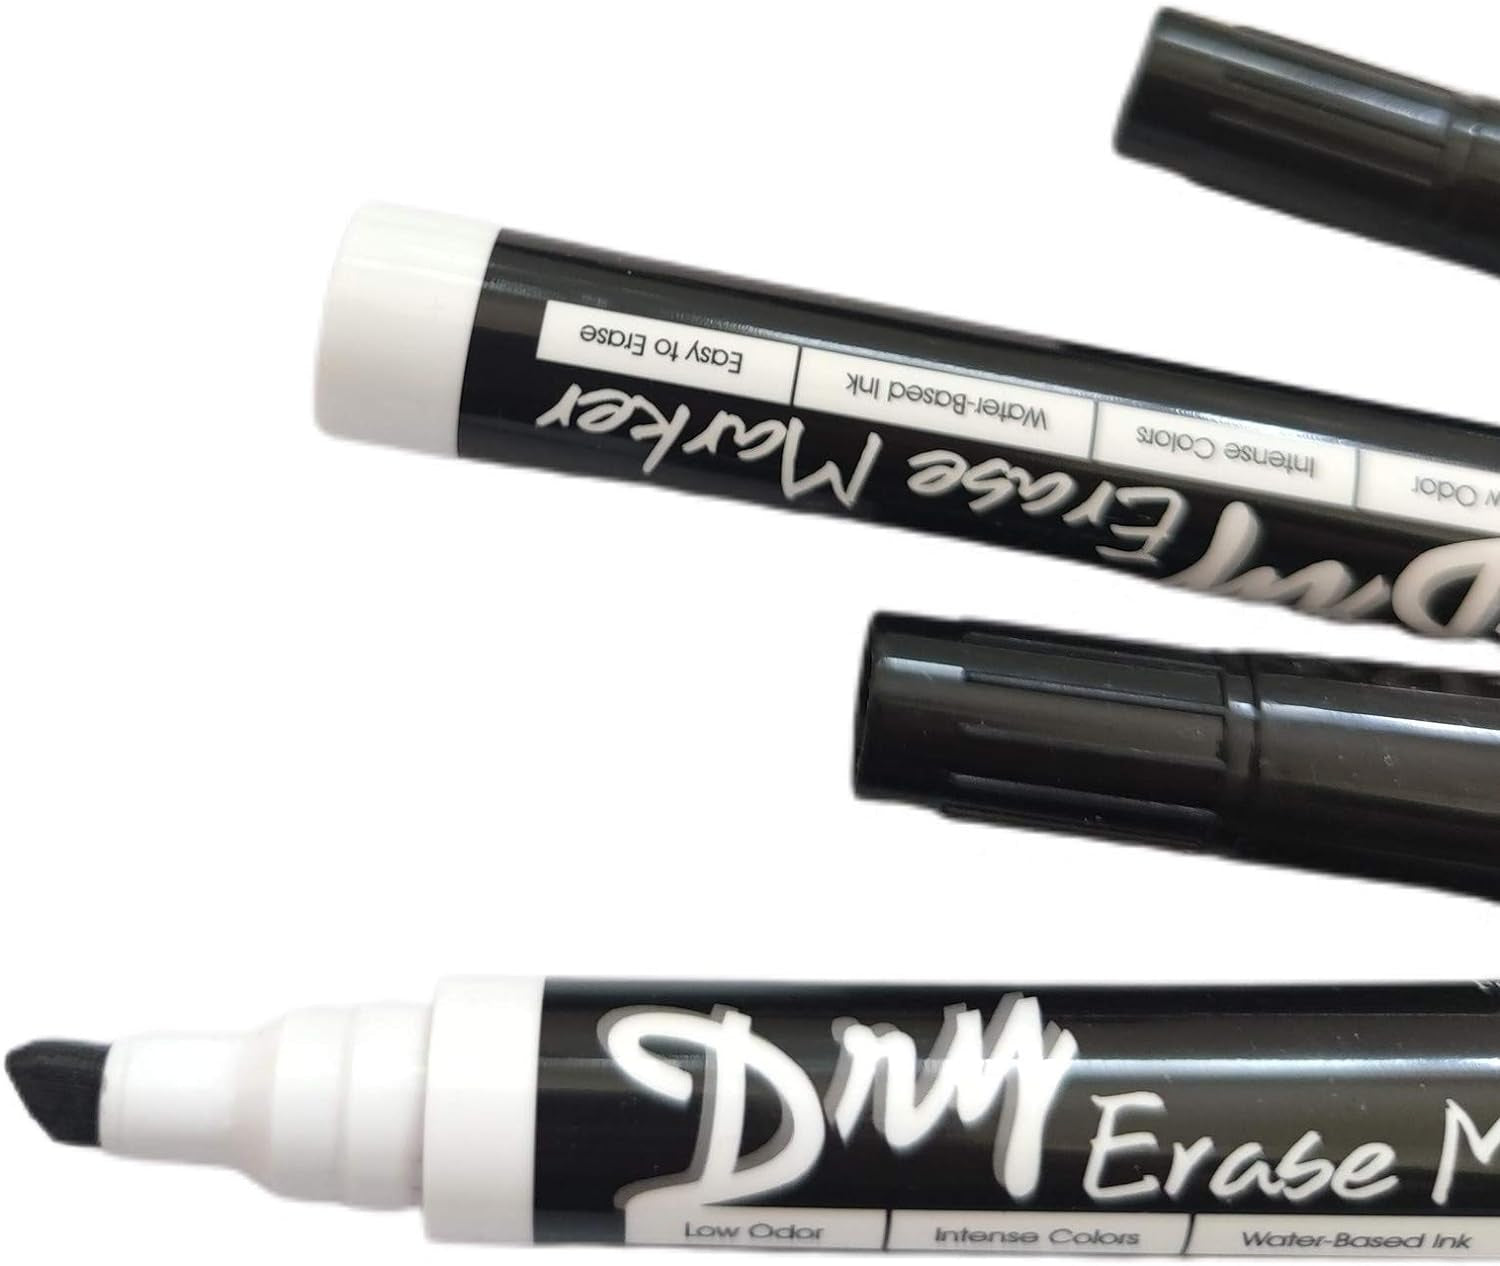 Black Dry Erase Markers Low Odor Chisel Tip Whiteboard Markers Pack of 10